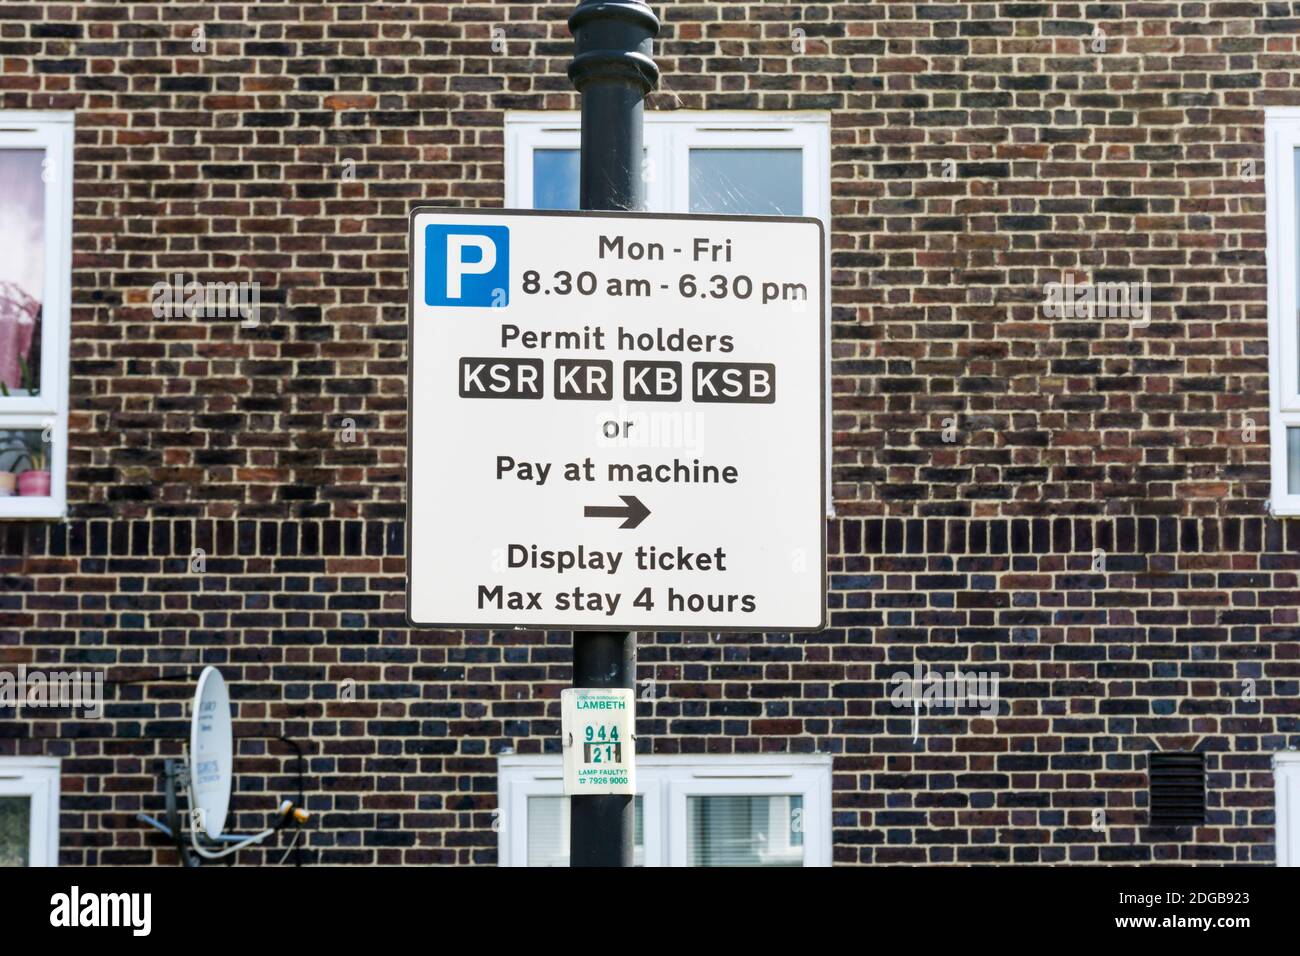 Permit holder car parking sign. Stock Photo